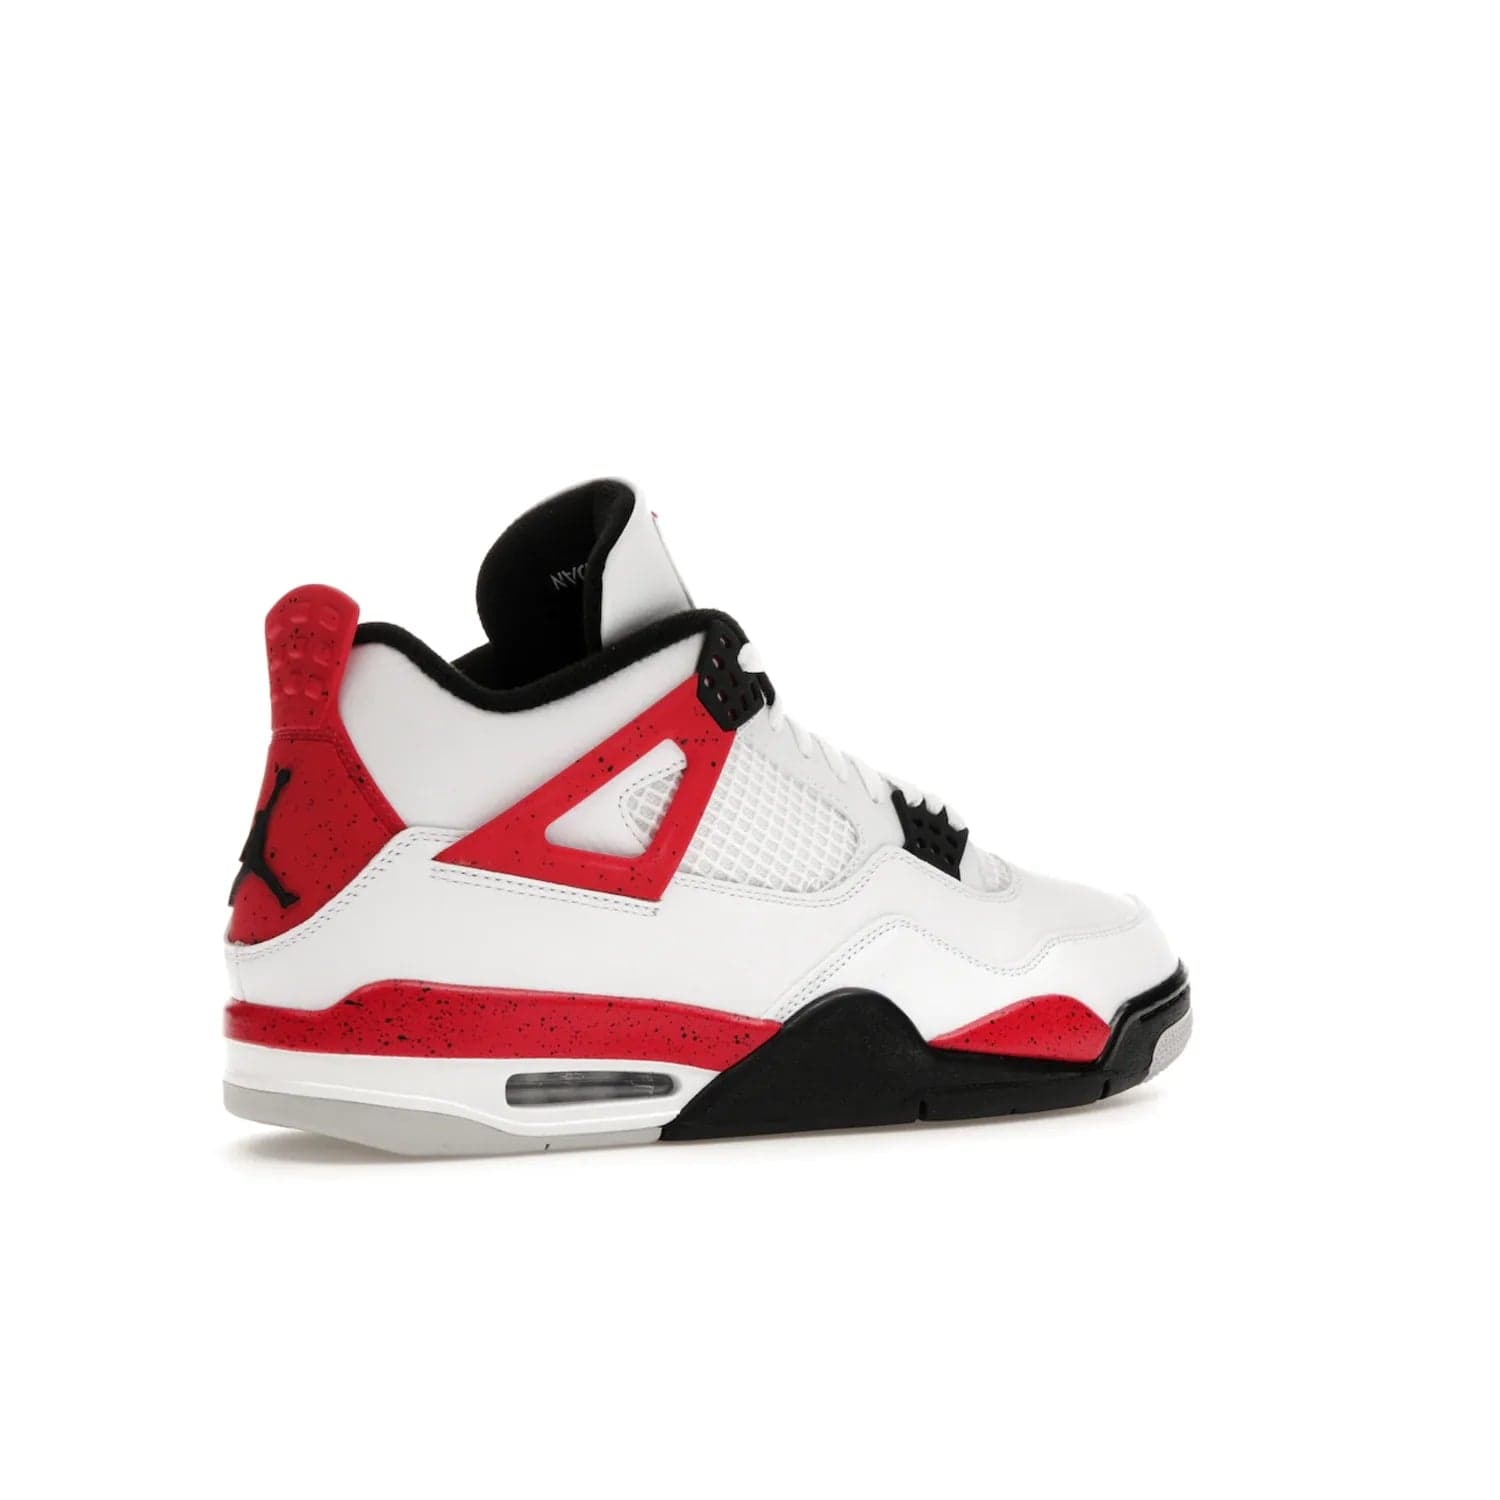 Jordan 4 Retro Red Cement - Image 34 - Only at www.BallersClubKickz.com - Iconic Jordan silhouette with a unique twist. White premium leather uppers with fire red and black detailing. Black, white, and fire red midsole with mesh detailing and Jumpman logo. Jordan 4 Retro Red Cement released with premium price.